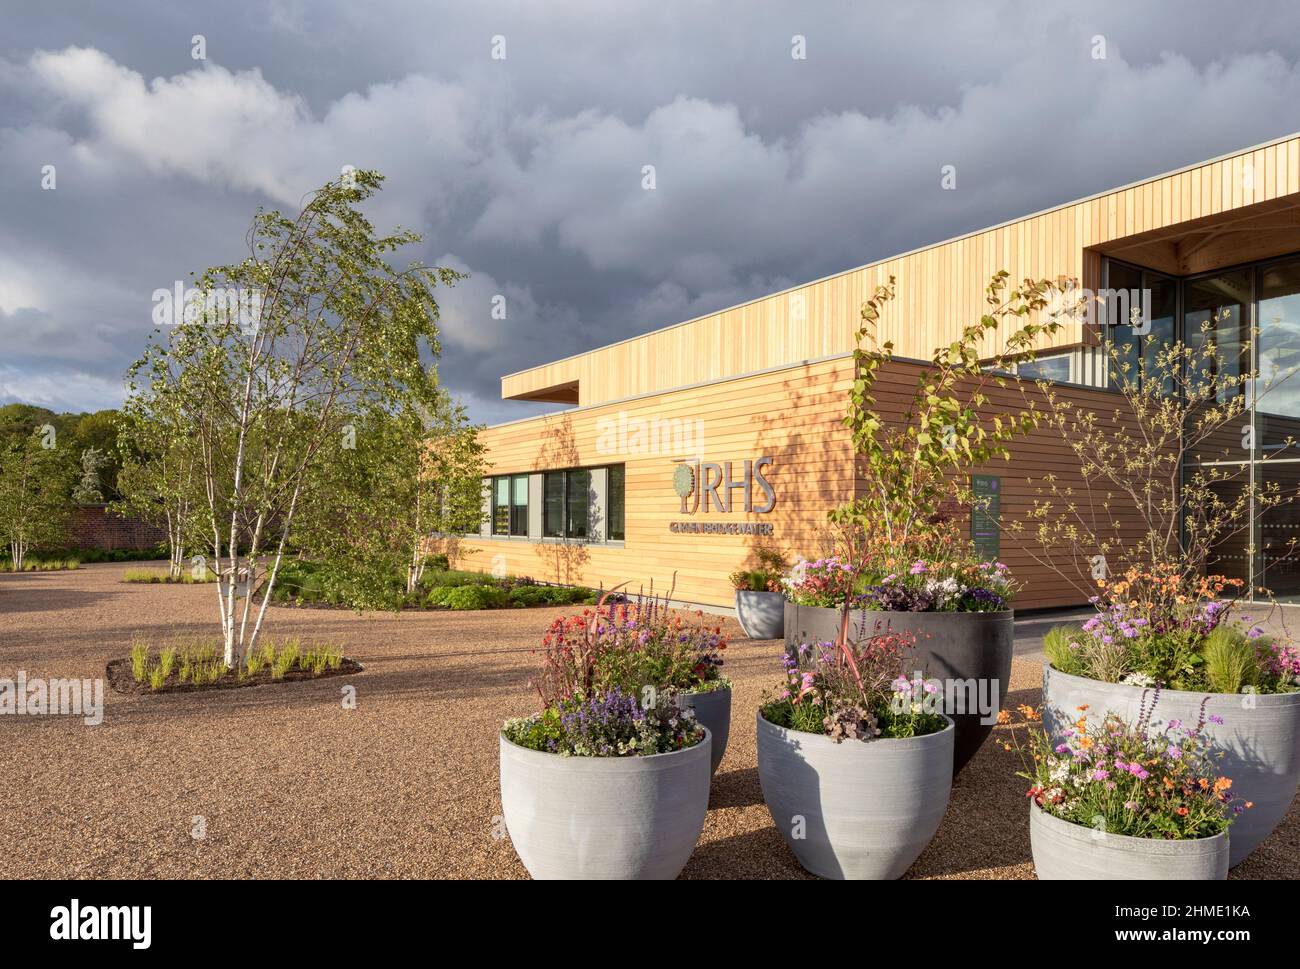 Entrance with plant pots. Royal Horticultural Society Visitor Centre, Worsley, Salford, United Kingdom. Architect: Hodder & Partners, 2021. Stock Photo